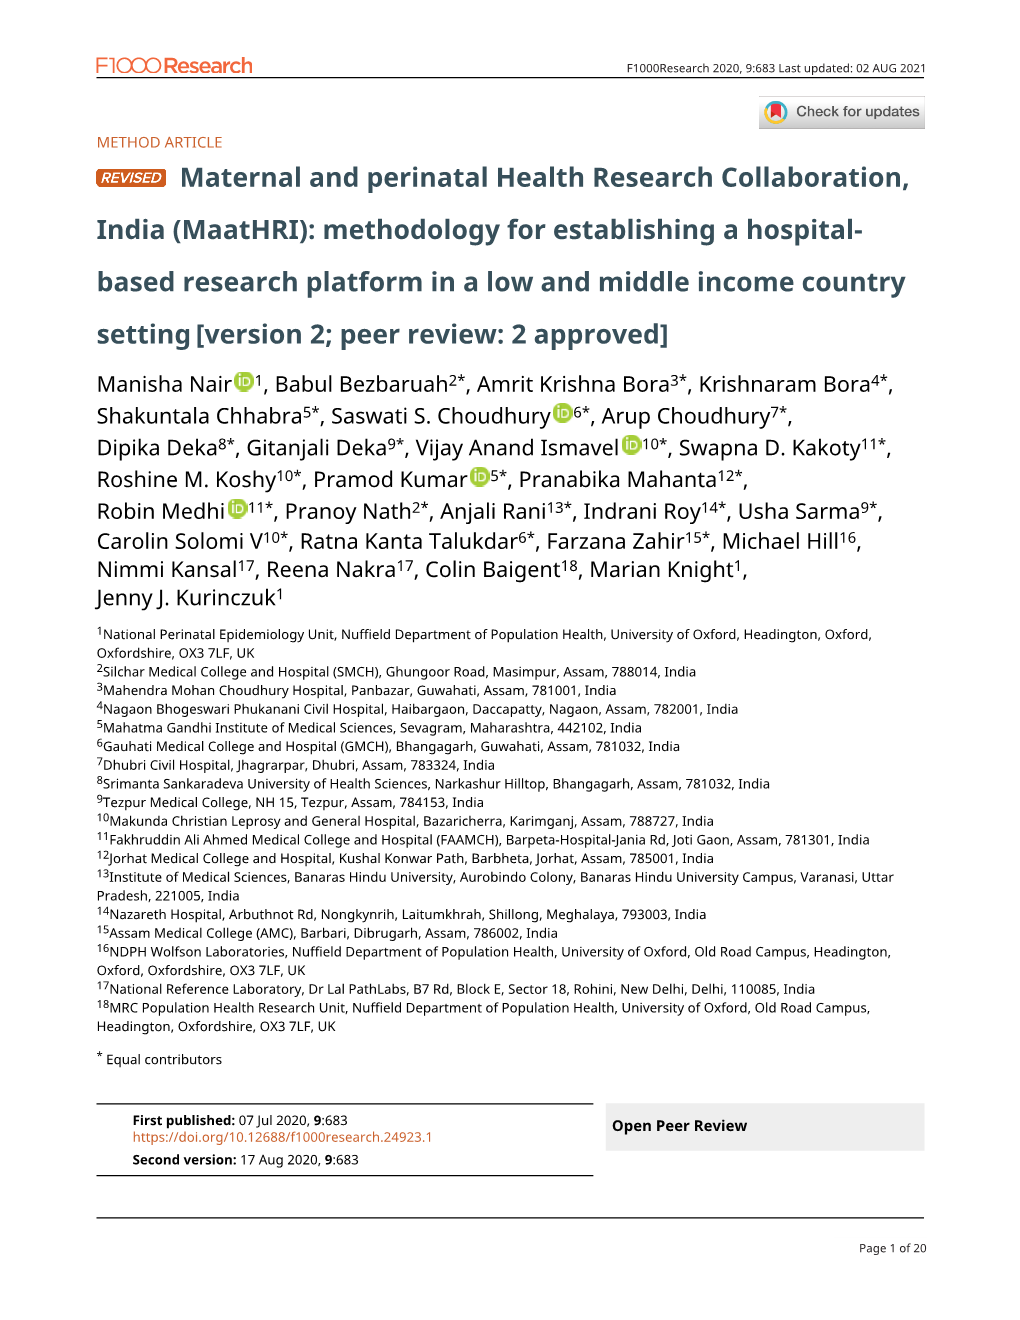 Maternal and Perinatal Health Research